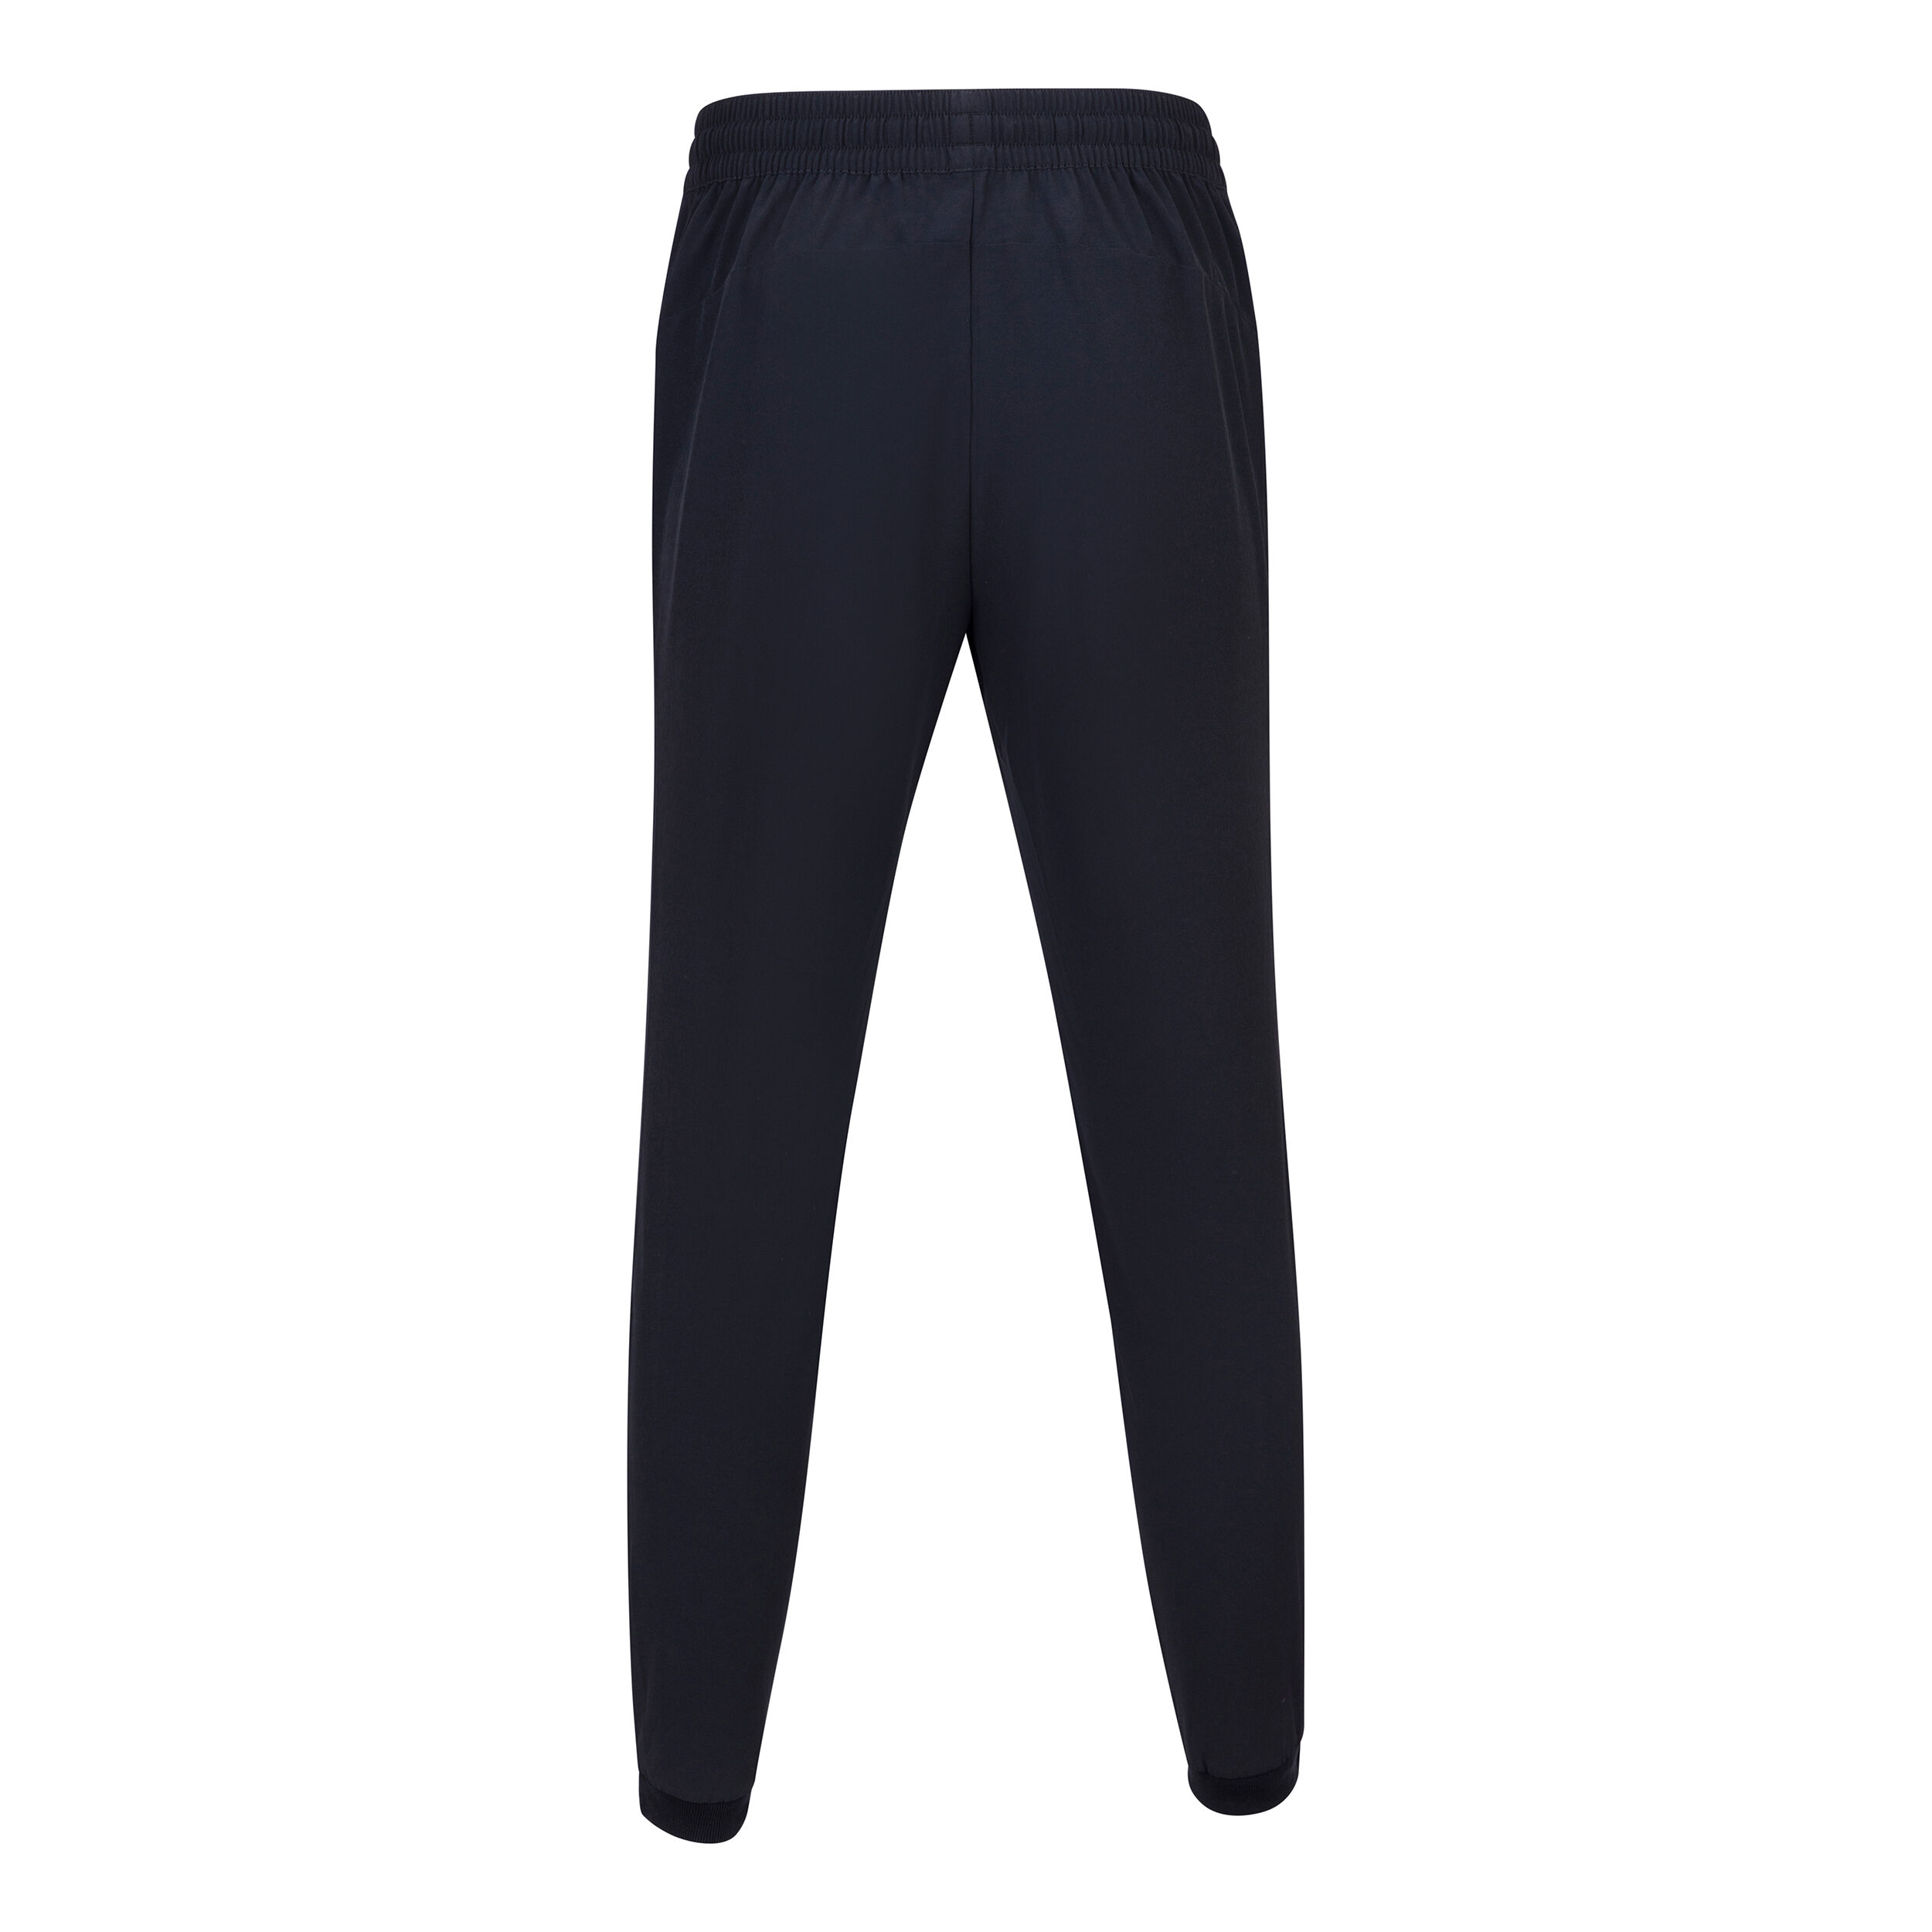 Buy adidas WORKOUT PANT Blue Training Track Pant online